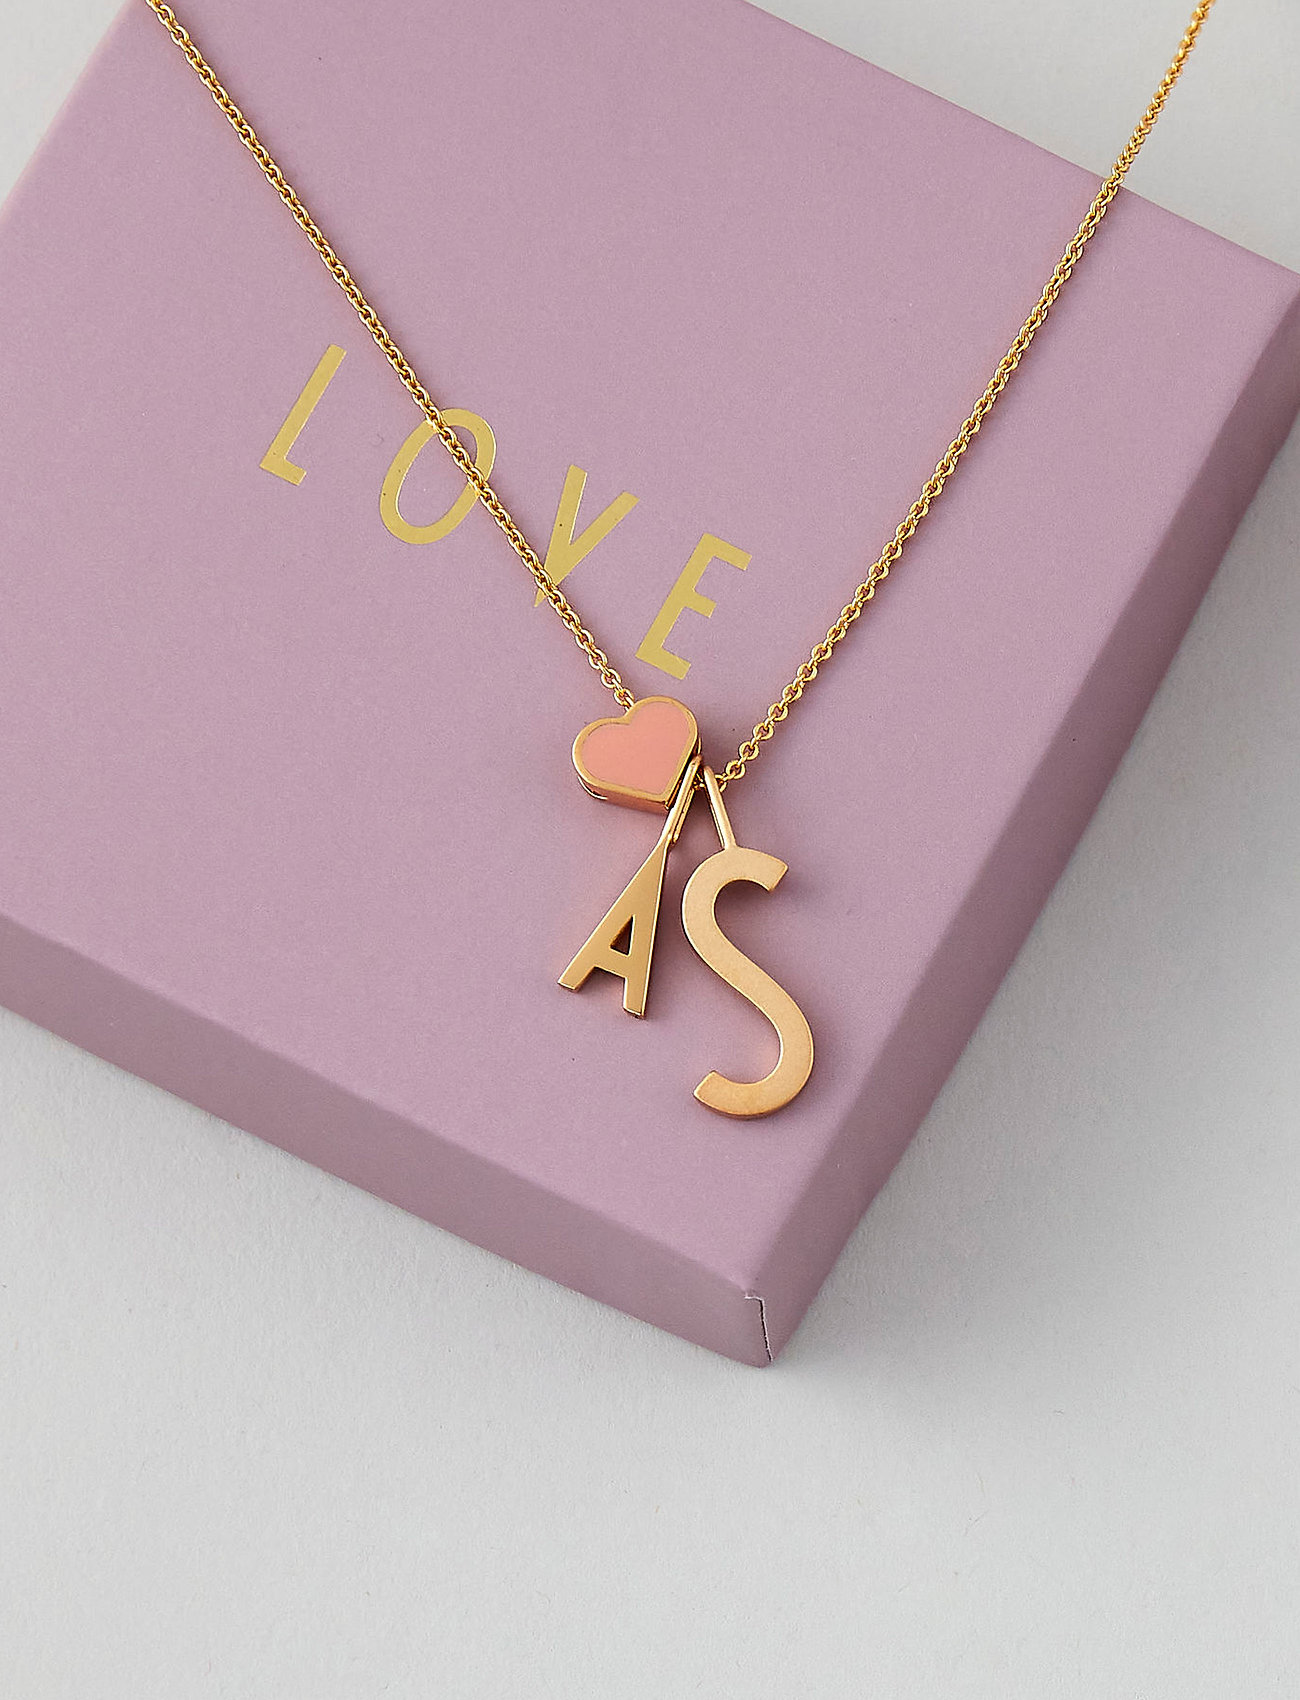 Design Letters - 10mm 18k gold plated silver a-z - pendants - gold - 0